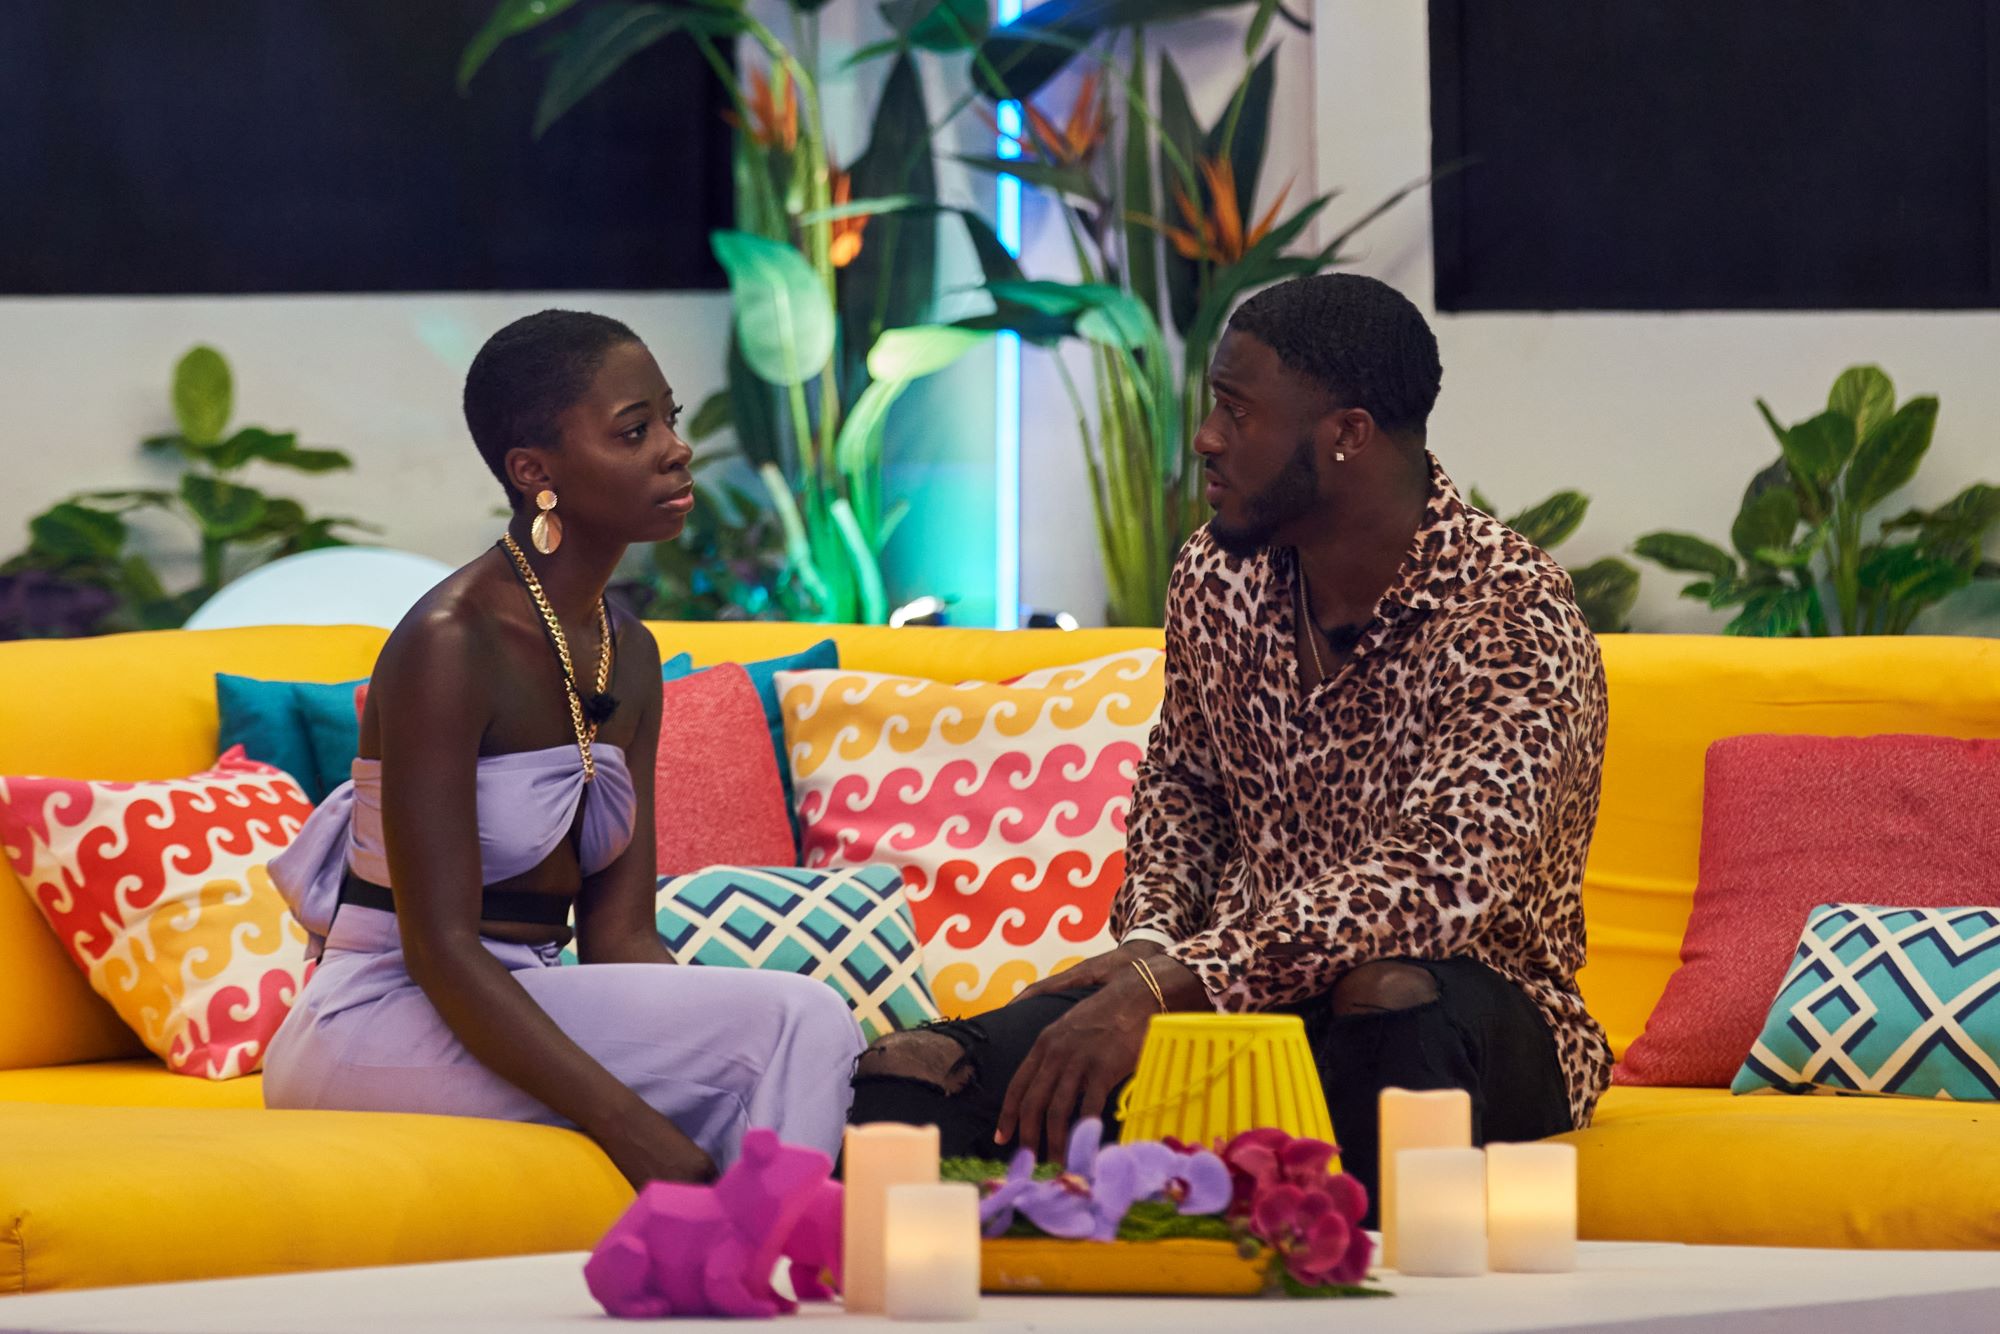 Cashay Proudfoot and Melvin 'Cinco' Holland Jr, who appeared on location in Hawaii in 'Love Island USA' Season 3, talk on the couch. Cashay wears a light purple pantsuit. Cinco wears a leopard print long-sleeved button-up shirt and black ripped jeans.